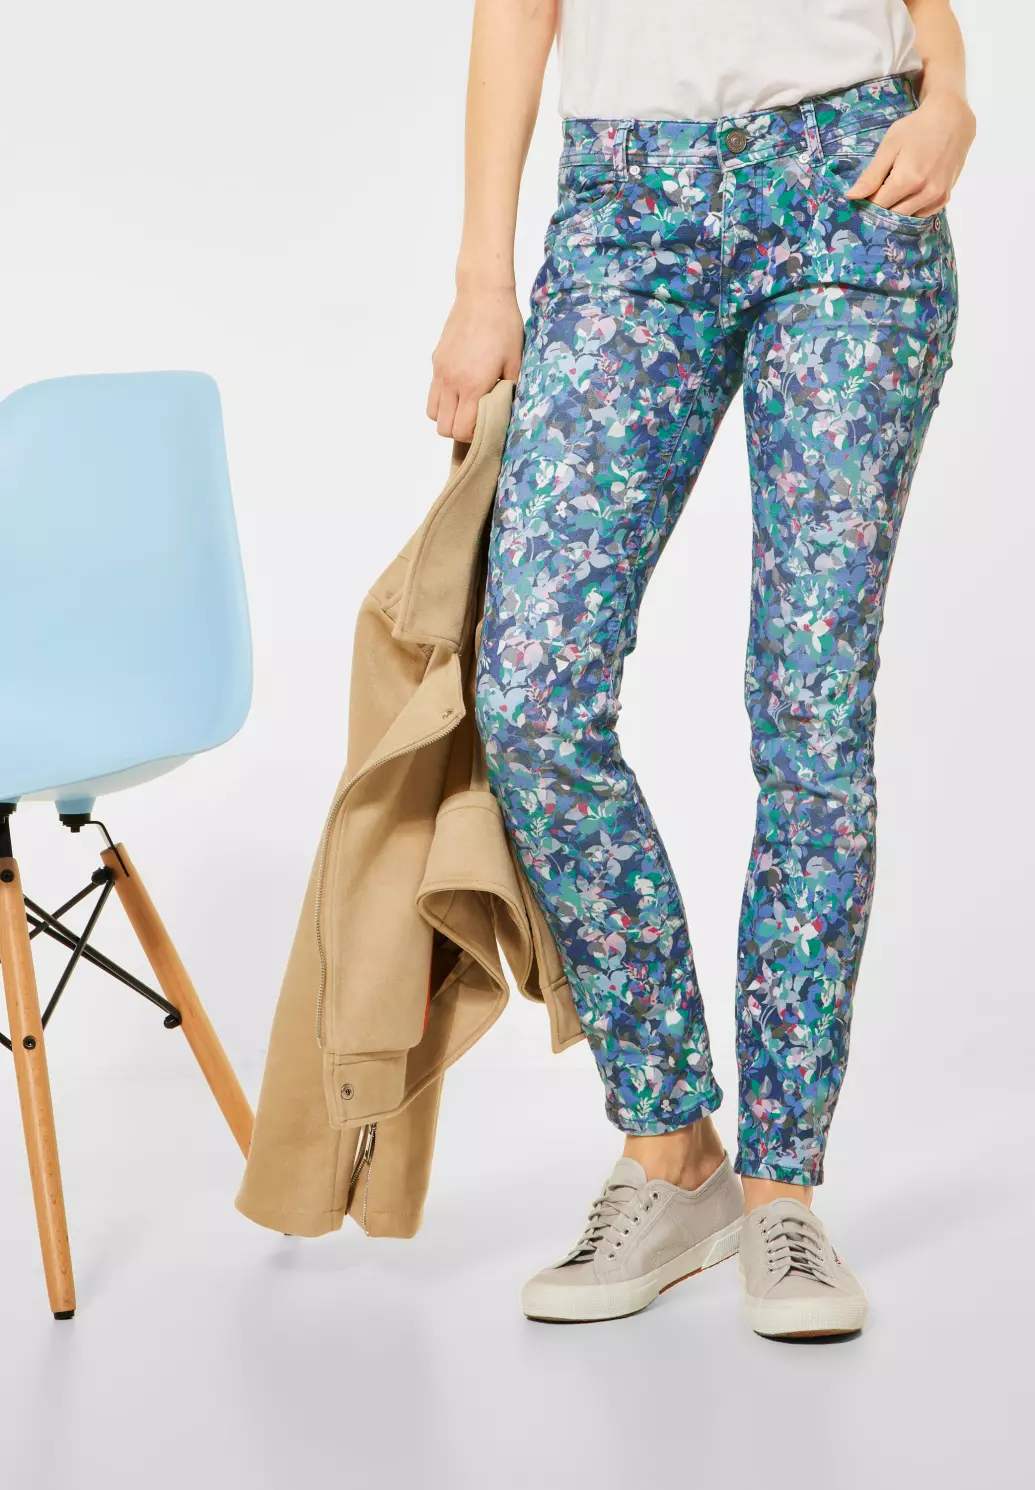 Off-White Floral Skinny Jeans | Best Price and Reviews | Zulily